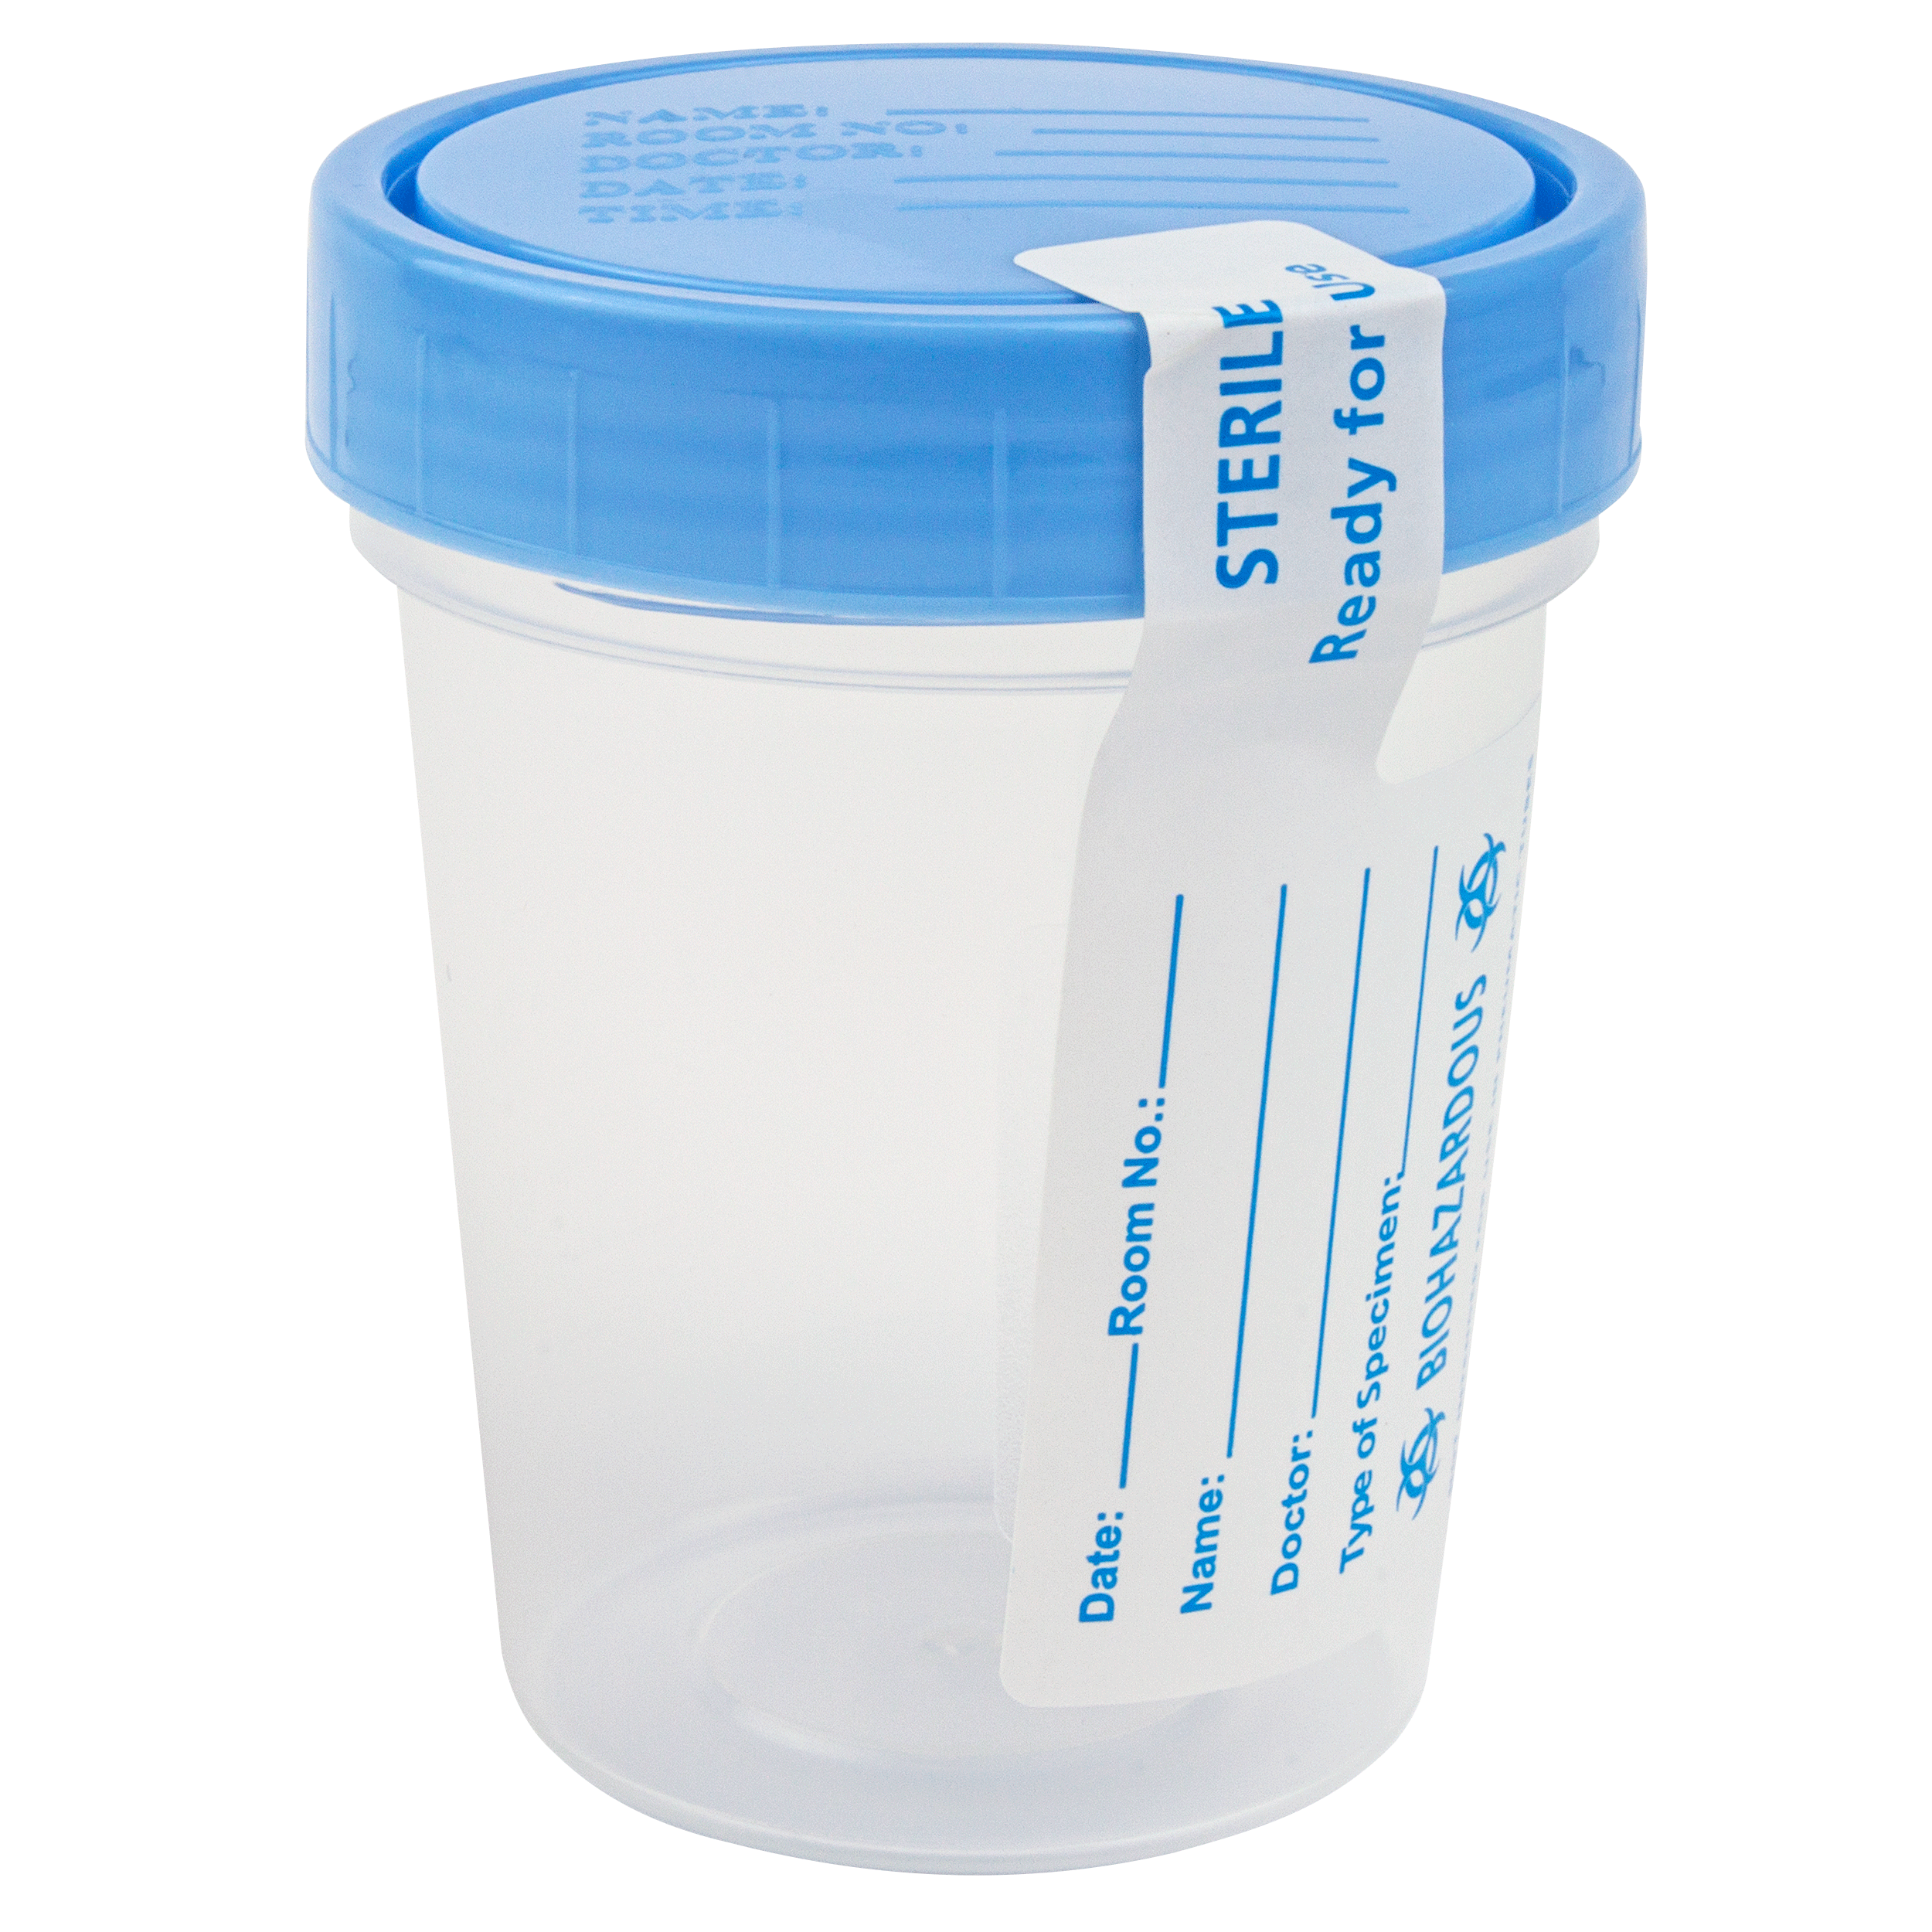 Specimen Containers, 4 oz. - Sterile, Bulk packed